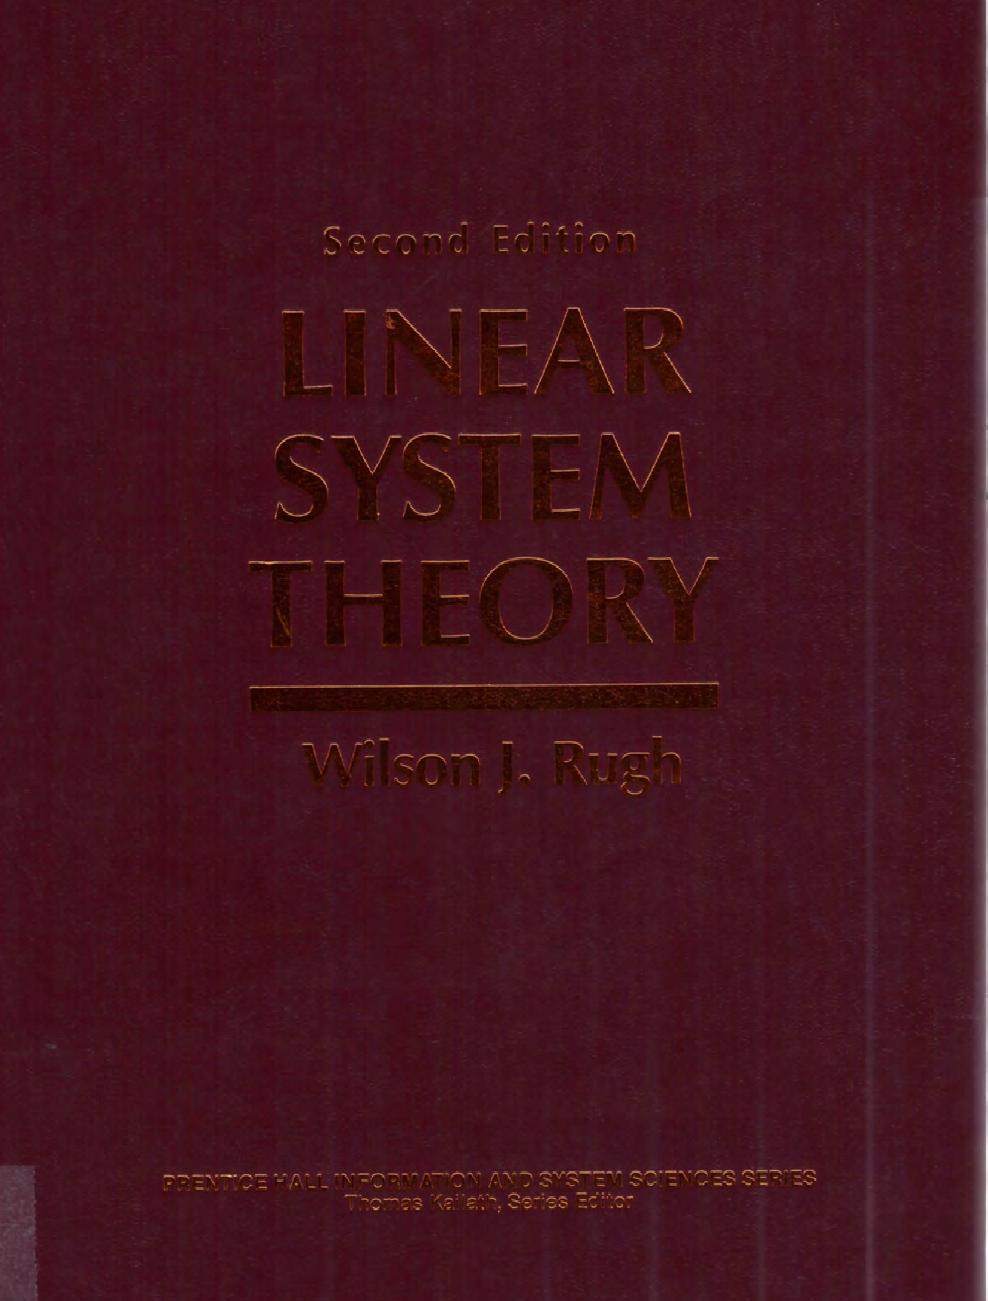 Linear System Theory 2nd Edition by Wilson J. Rugh.jpg